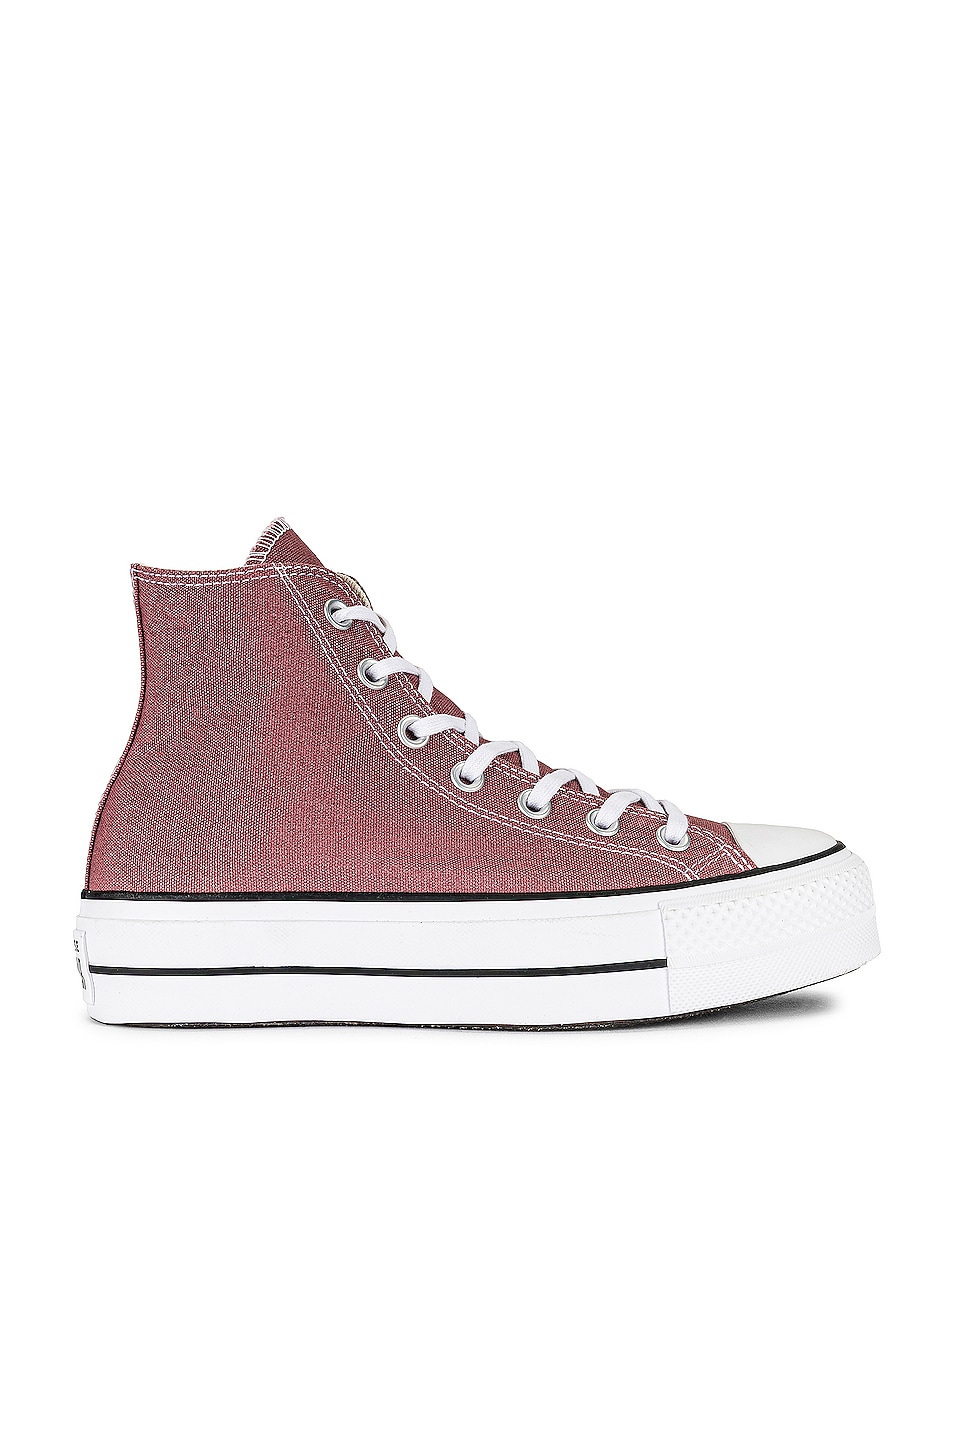 Image 1 of Converse Chuck Taylor All Star Lift Seasonal Color in Saddle, Black, & White